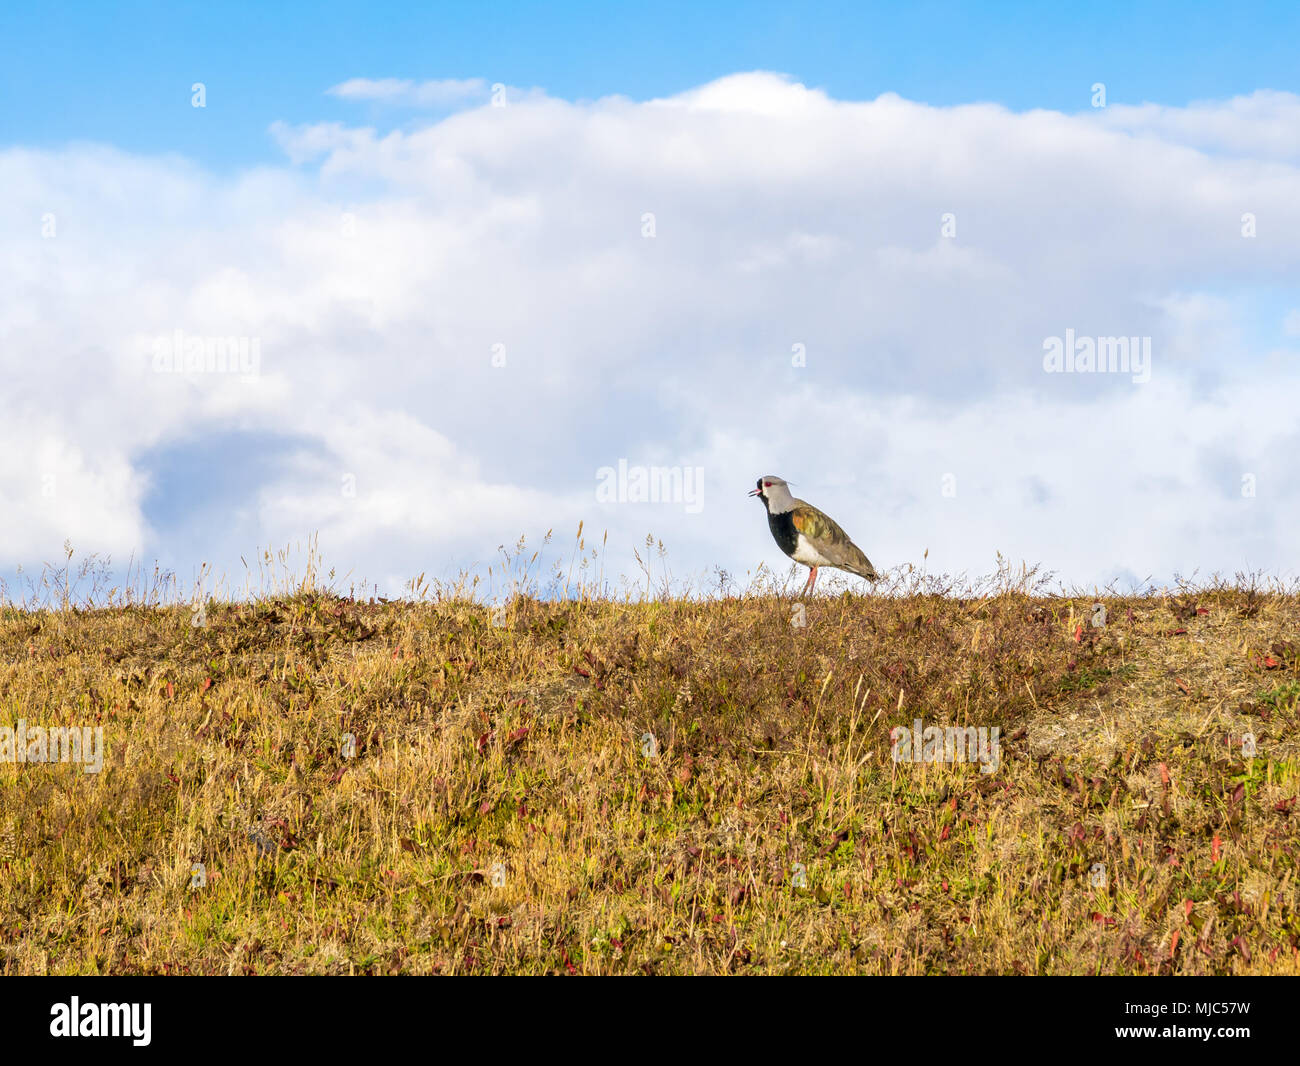 Tero bird or southern lapwing, Vanellus chilensis, standing on hill in Terra del Fuego near Ushuaia, Patagonia, Argentina Stock Photo